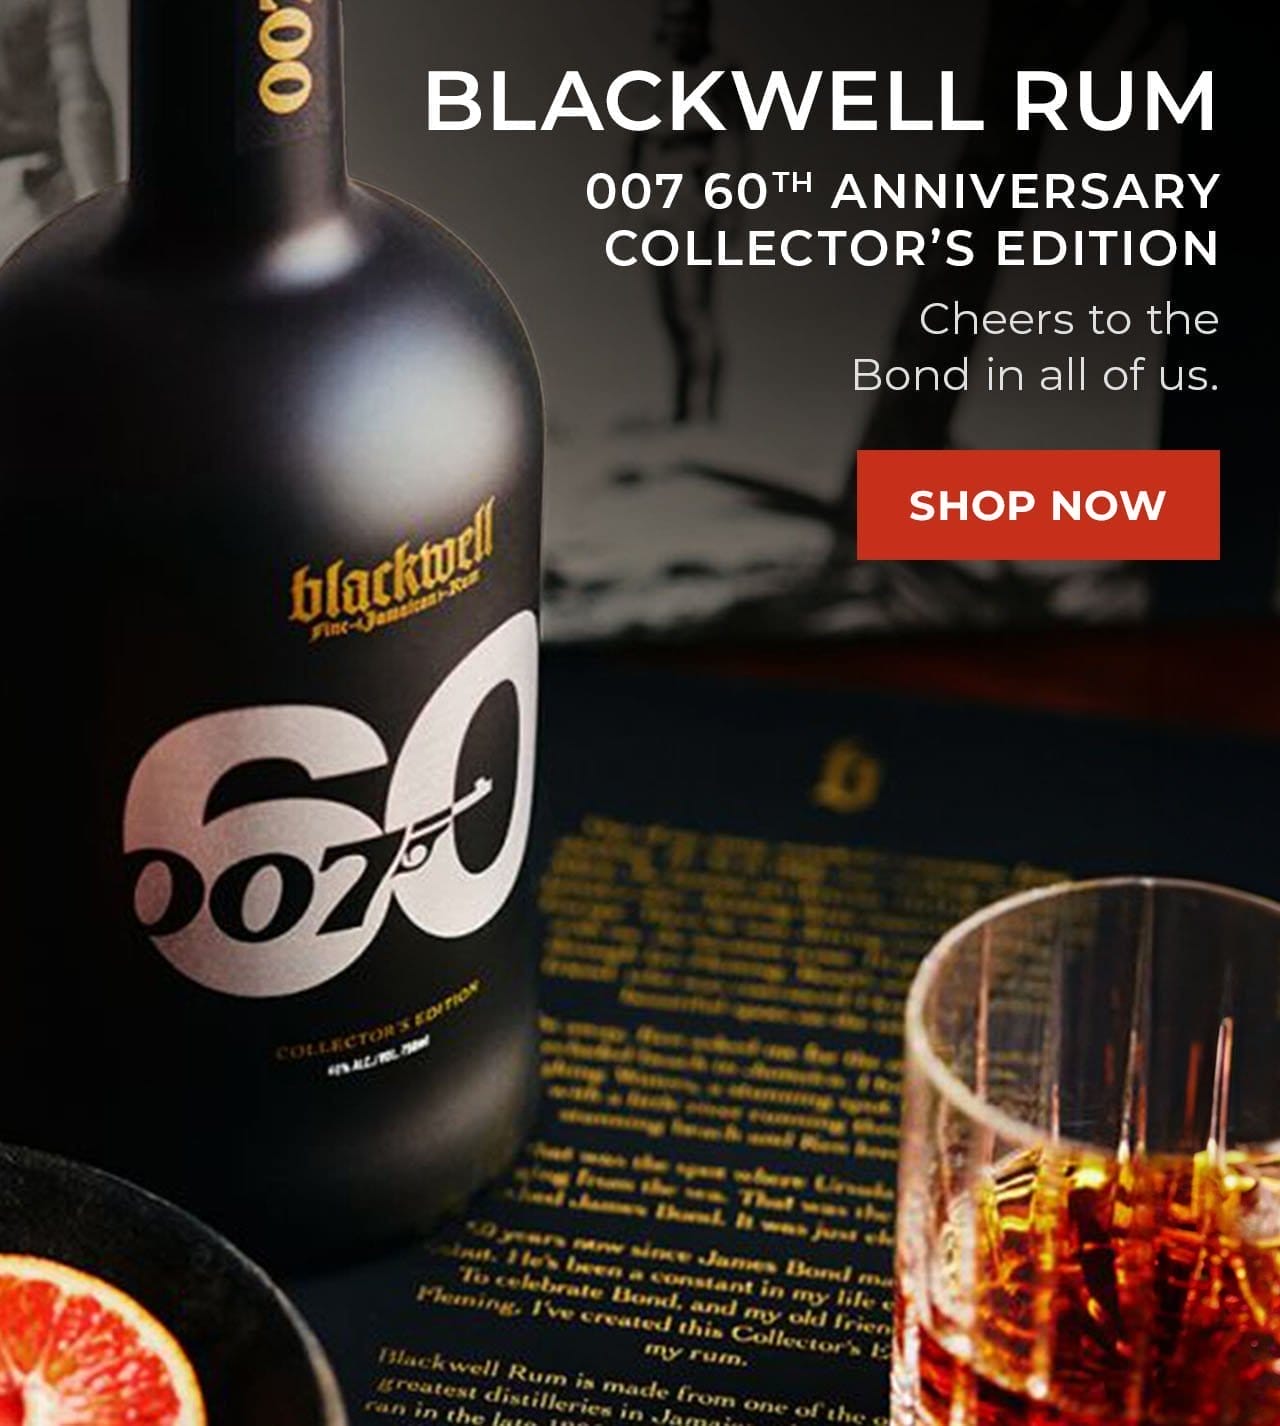 007 Blackwell Rum | SHOP NOW